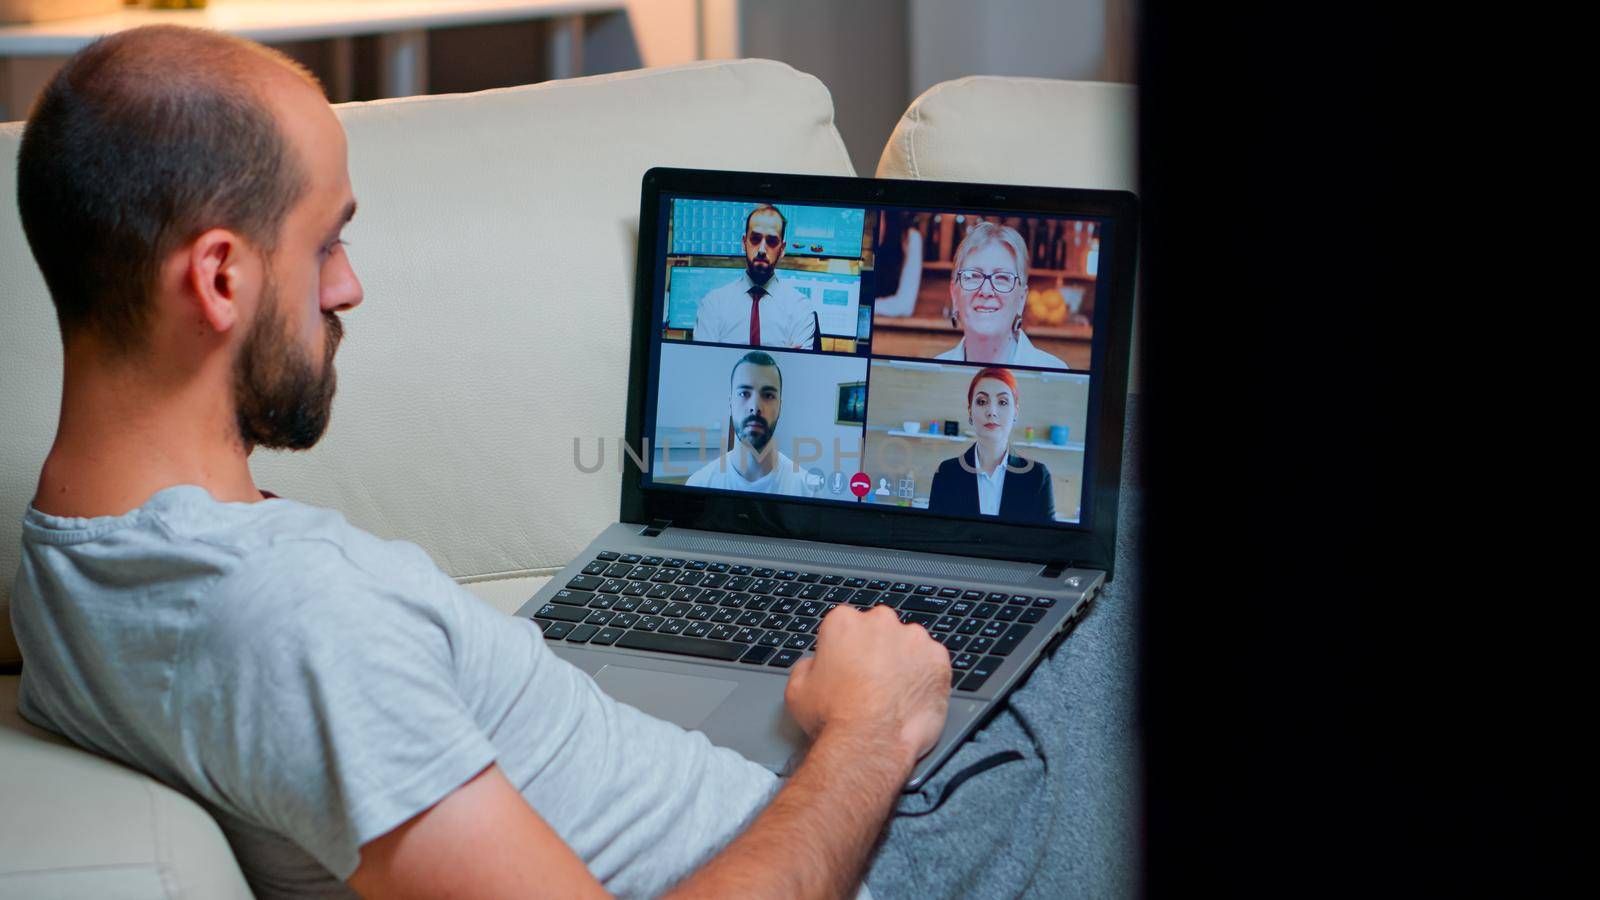 Over shoulder view of man in pajamas having online conversation with teammates working at online technology project using laptop computer, videoconference web internet communication